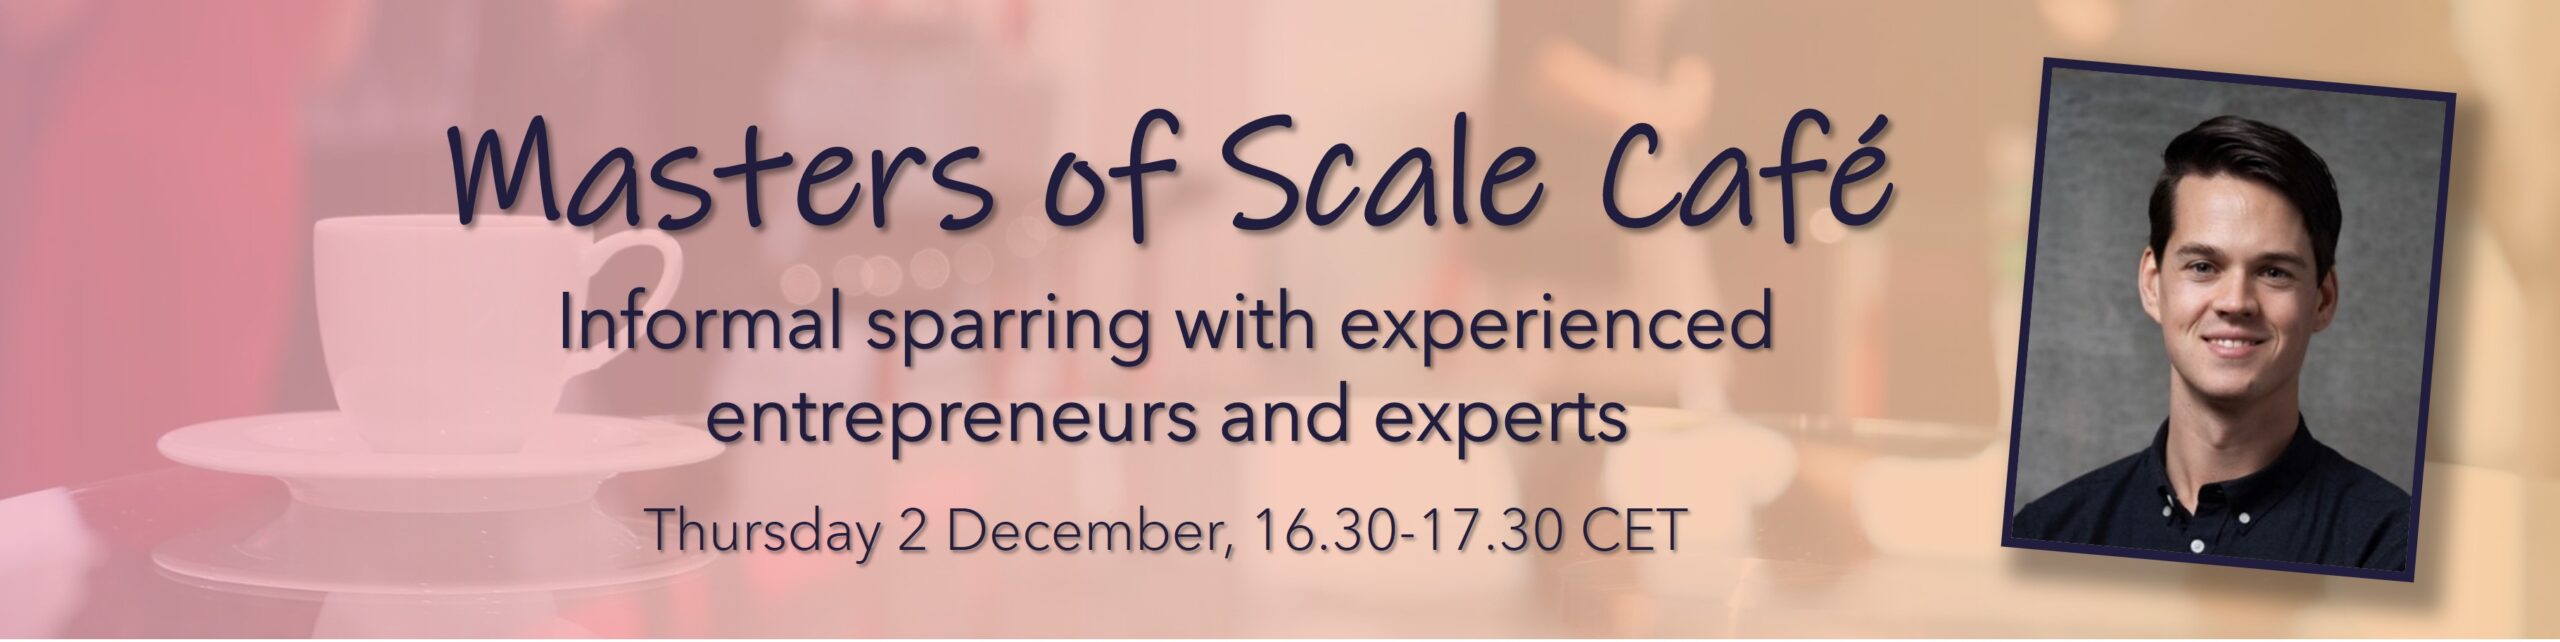 Masters of Scale Café with Richard Burger, Co-founder Swapfiets